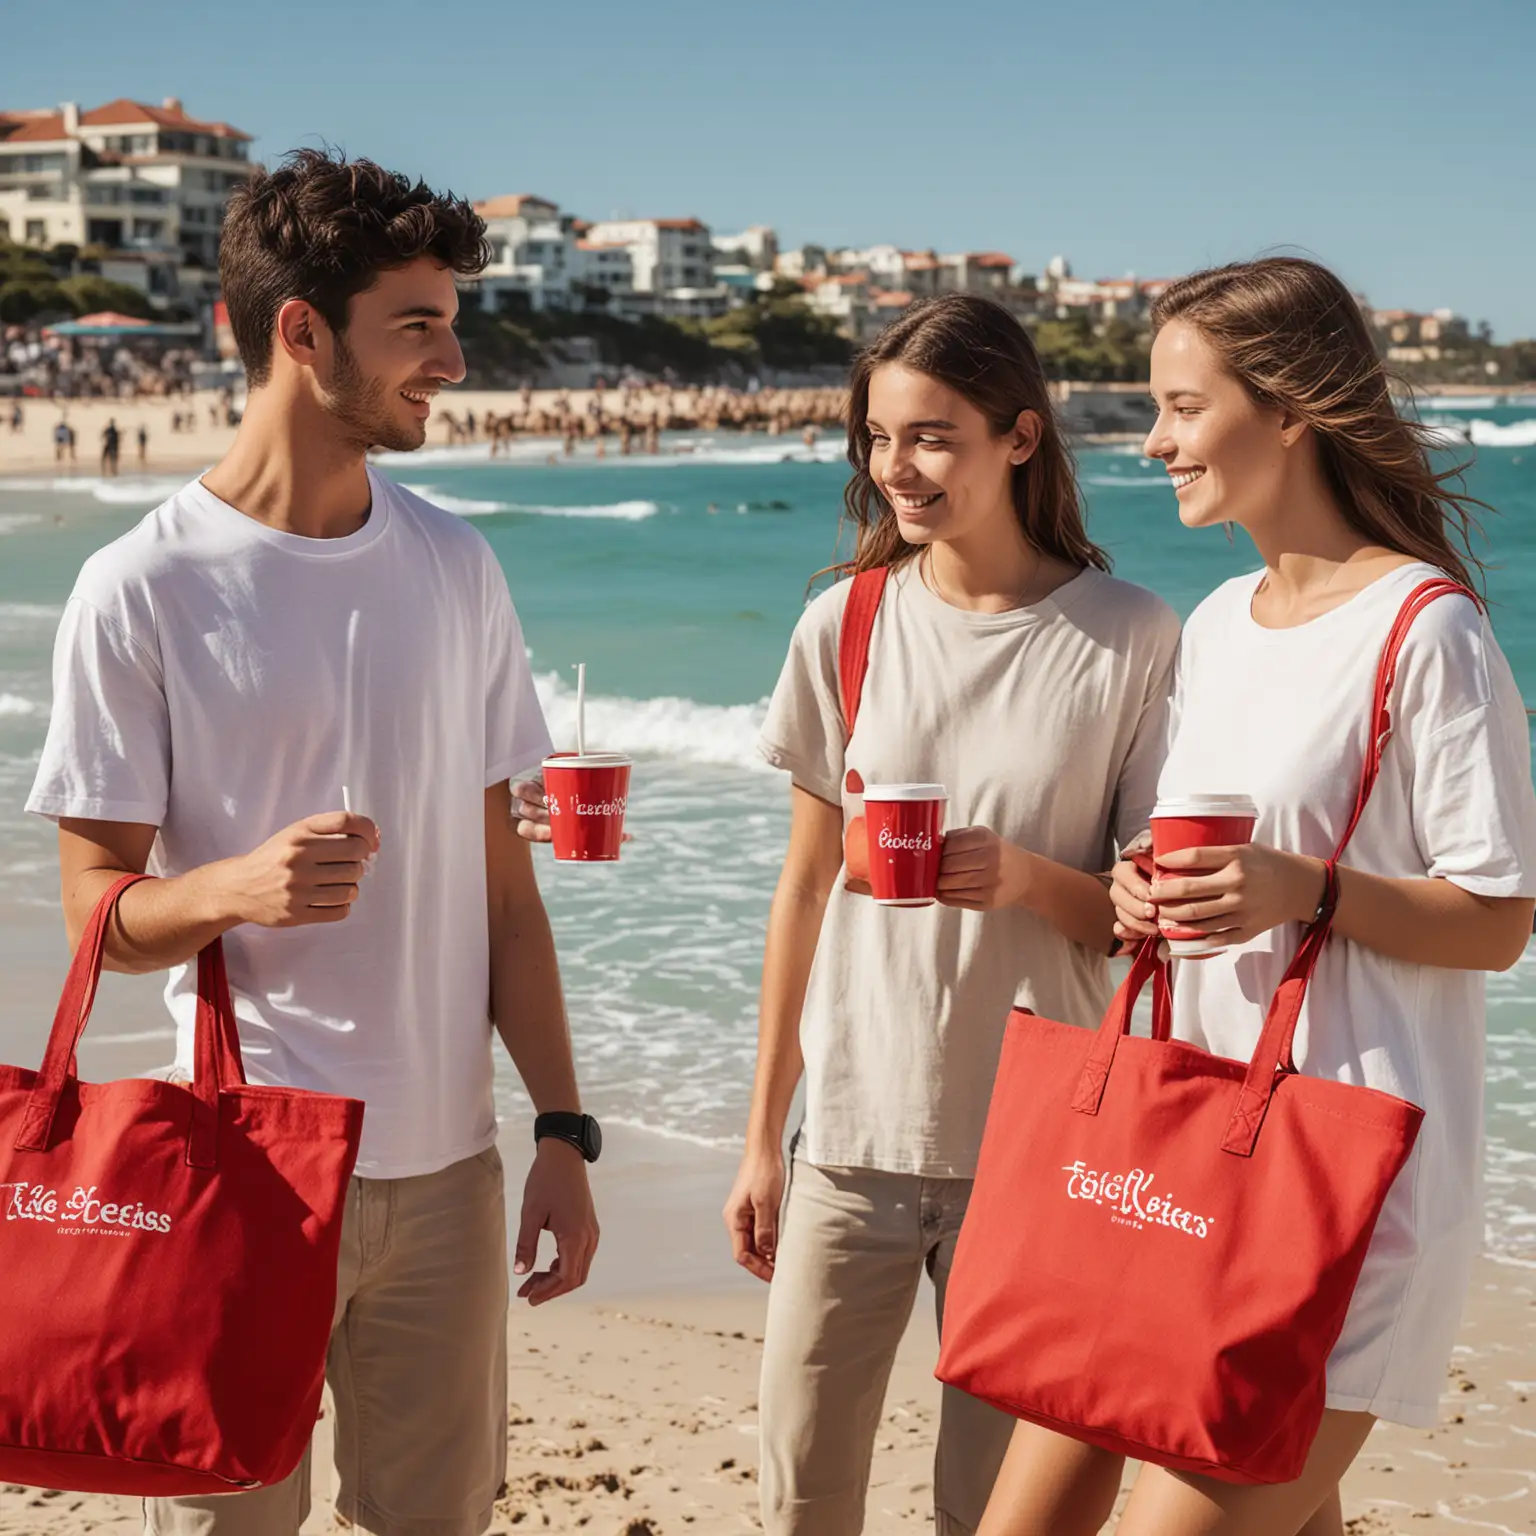 a group of youngsters boys & girls mid 20's carrying a red canvas tote bag  with no branding across their shoulders on bondi beach, sipping a coffee at a cafe , create a vibrant coffee very sydney scene. fashion photography . Sony a7R IV camera, Meike 80mm F1.8 lens, action photography
